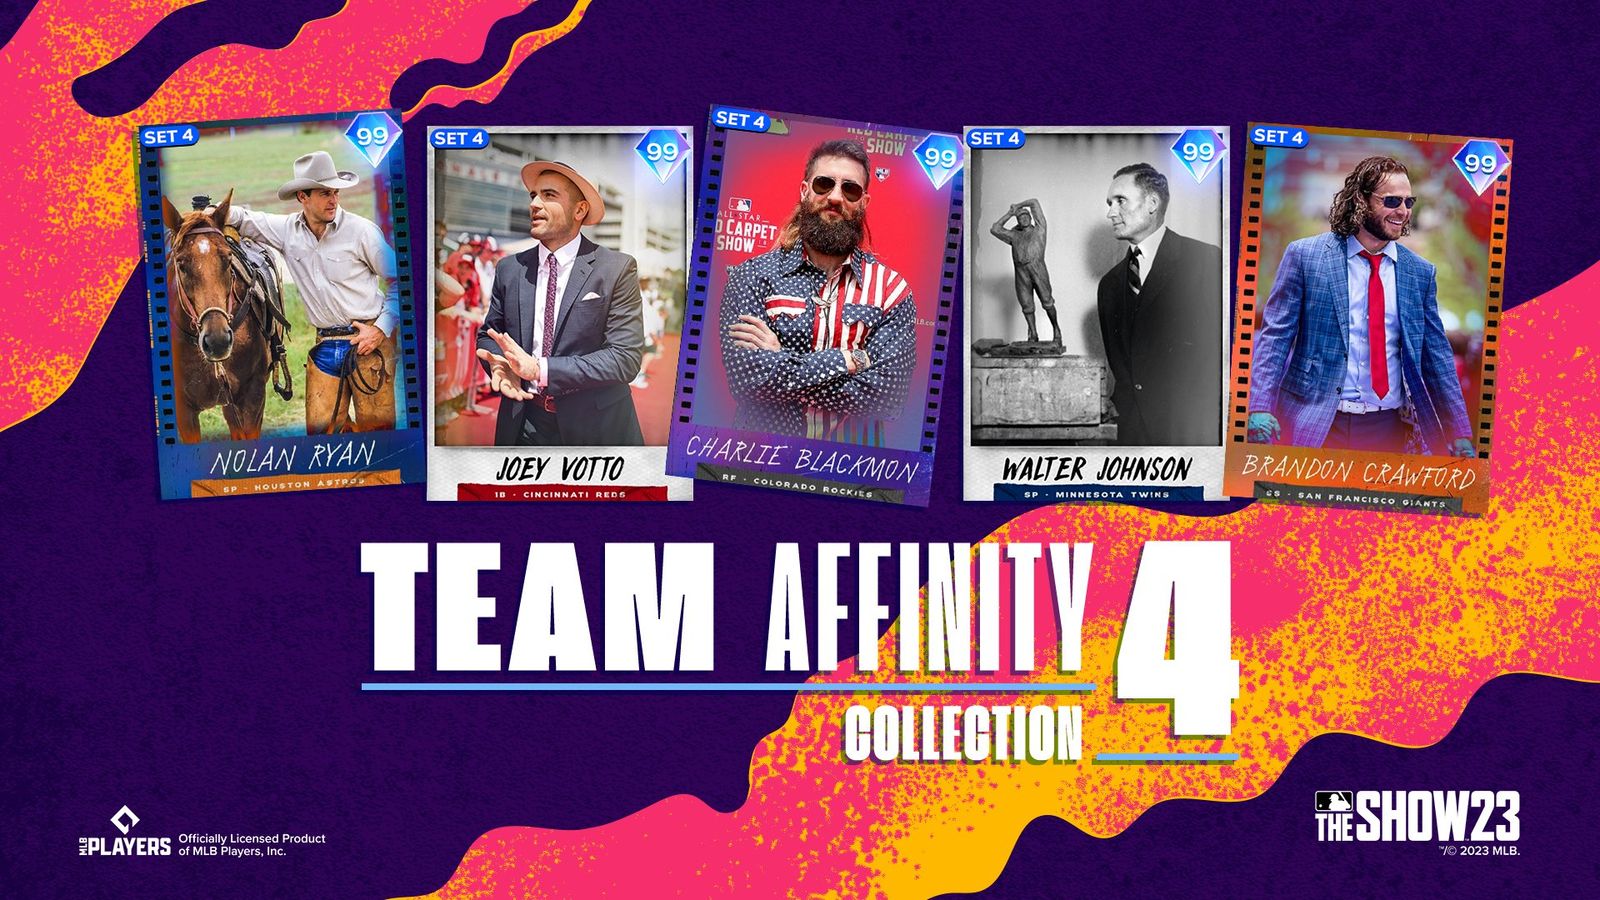 MLB The Show 23 Team Affinity 4 cards